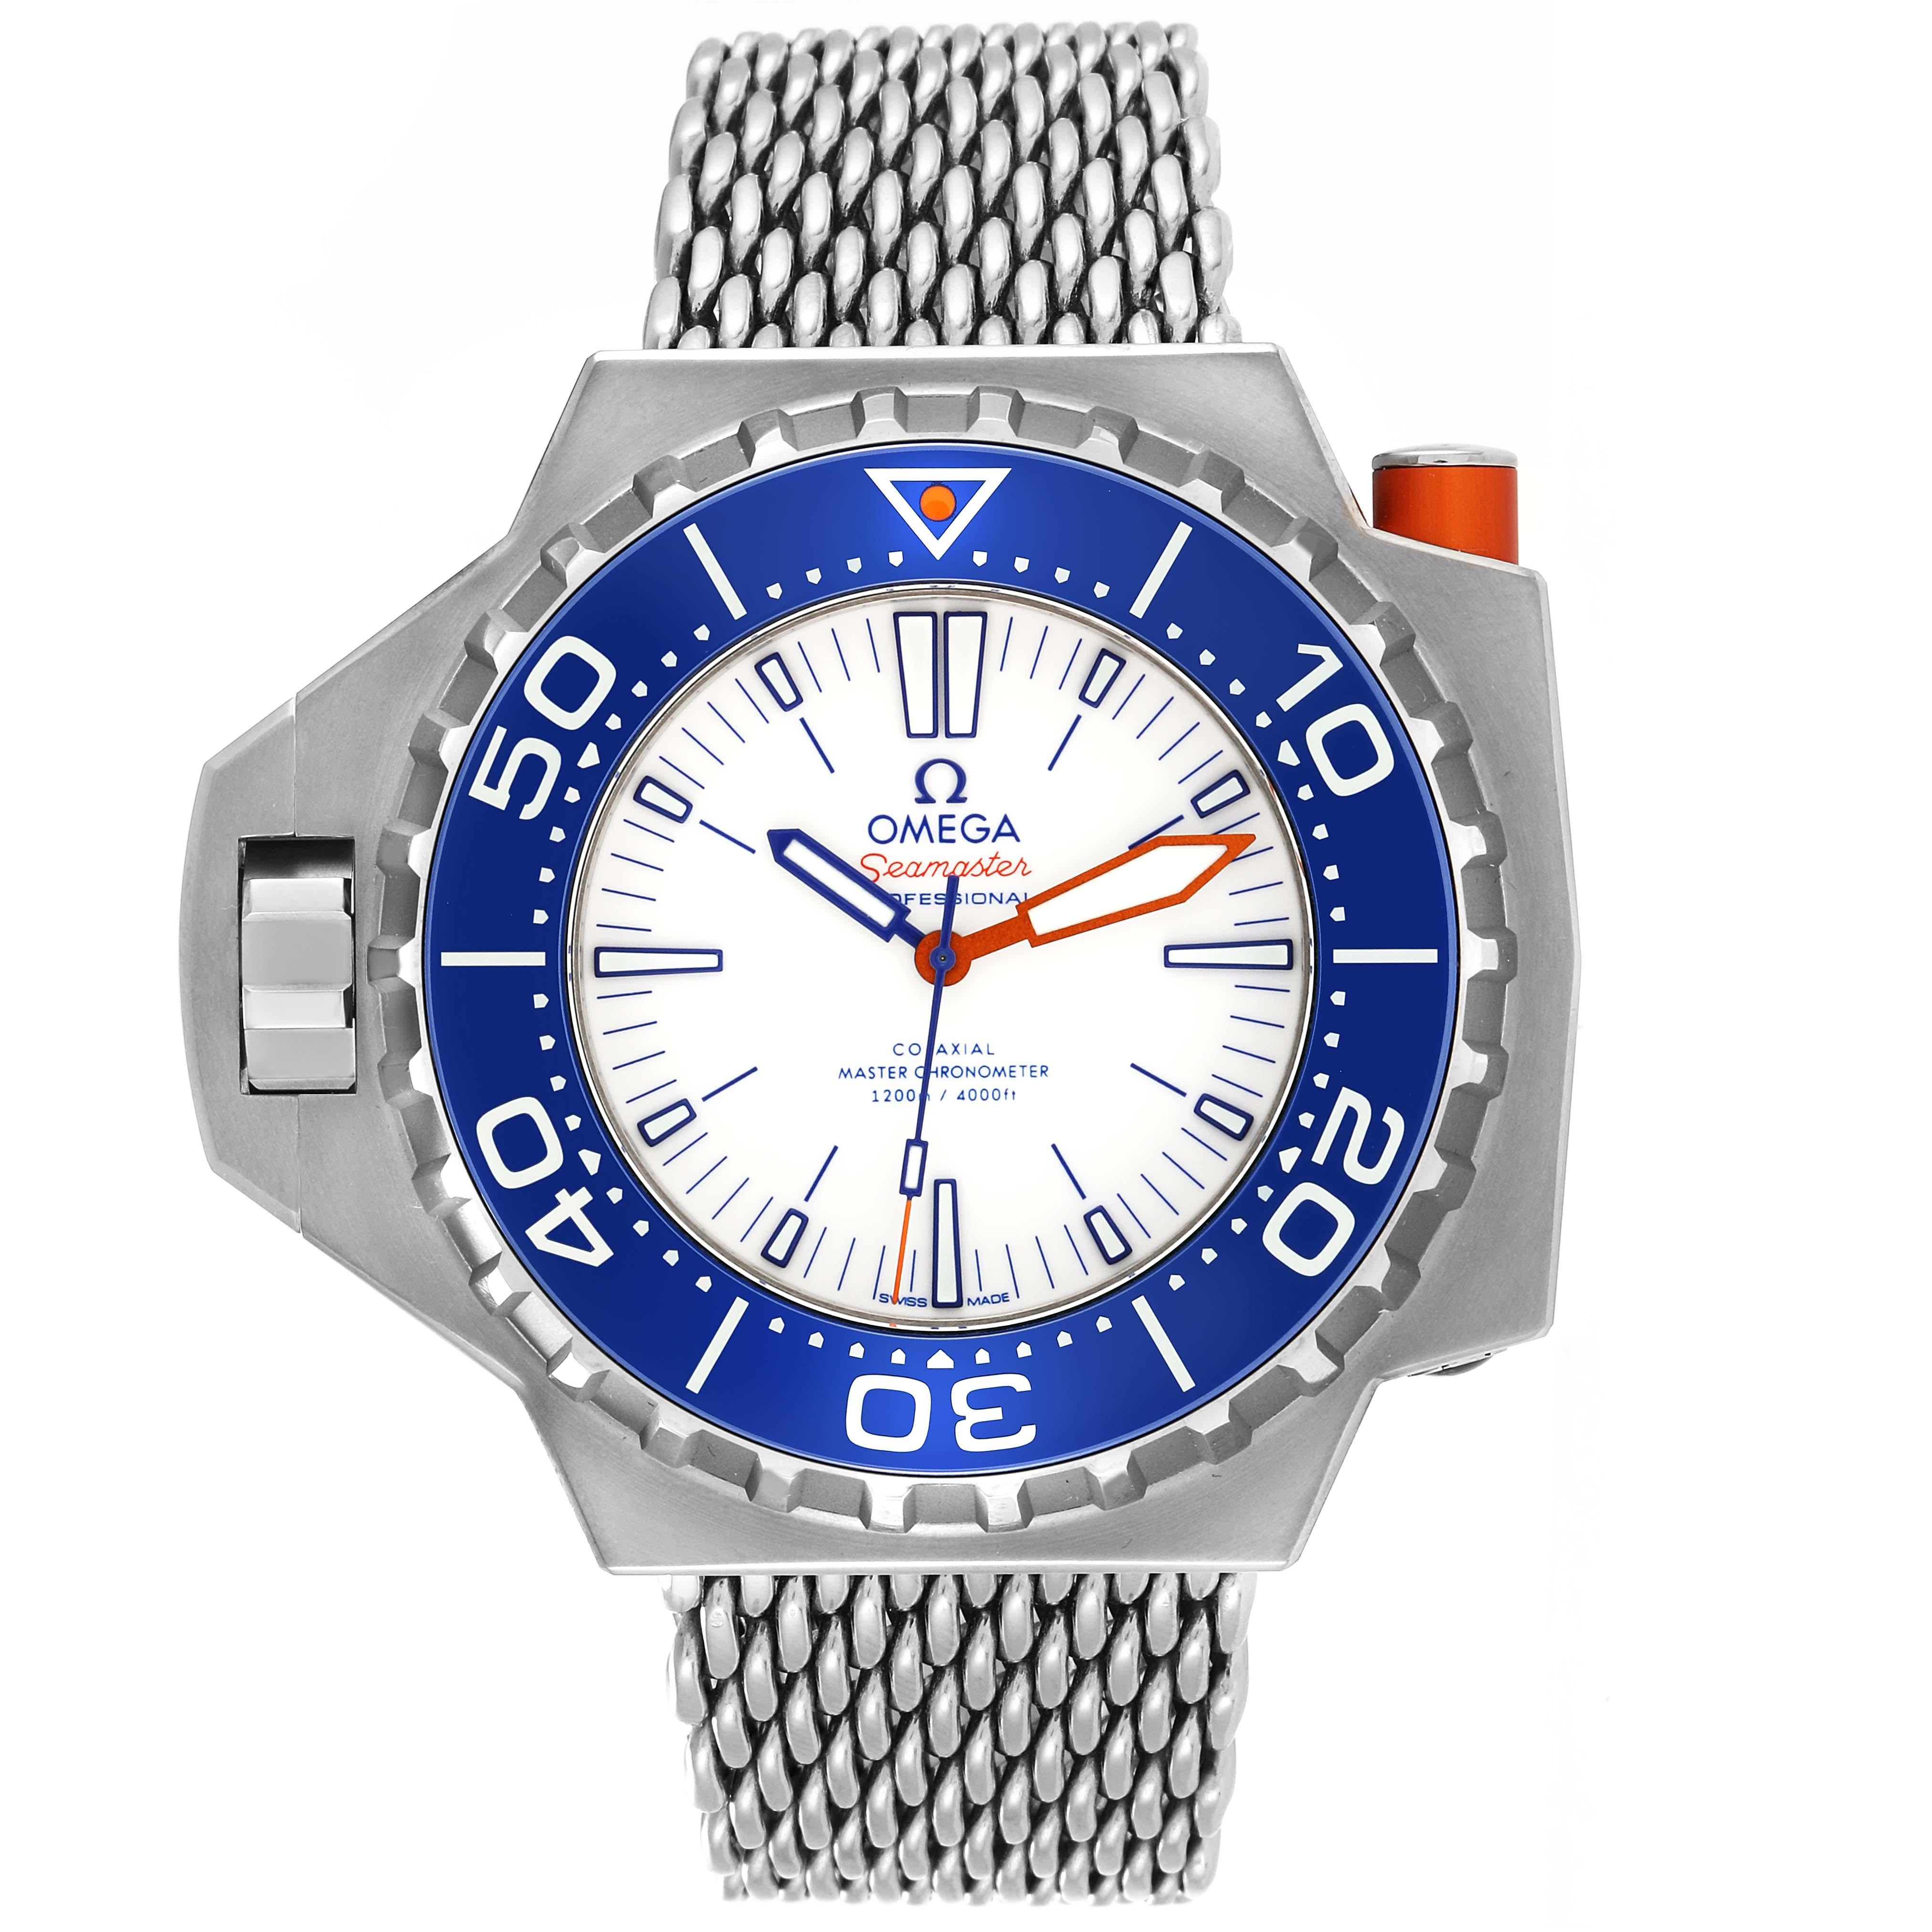 Omega Seamaster Ploprof Titanium Mens Watch 227.90.55.21.04.001 Unworn. Automatic self-winding Co-Axial movement. Caliber 8912. Titanium case 55 x 48 mm in diameter. Left hand crown with a solid steel crown-protector. Helium escape valve on the case